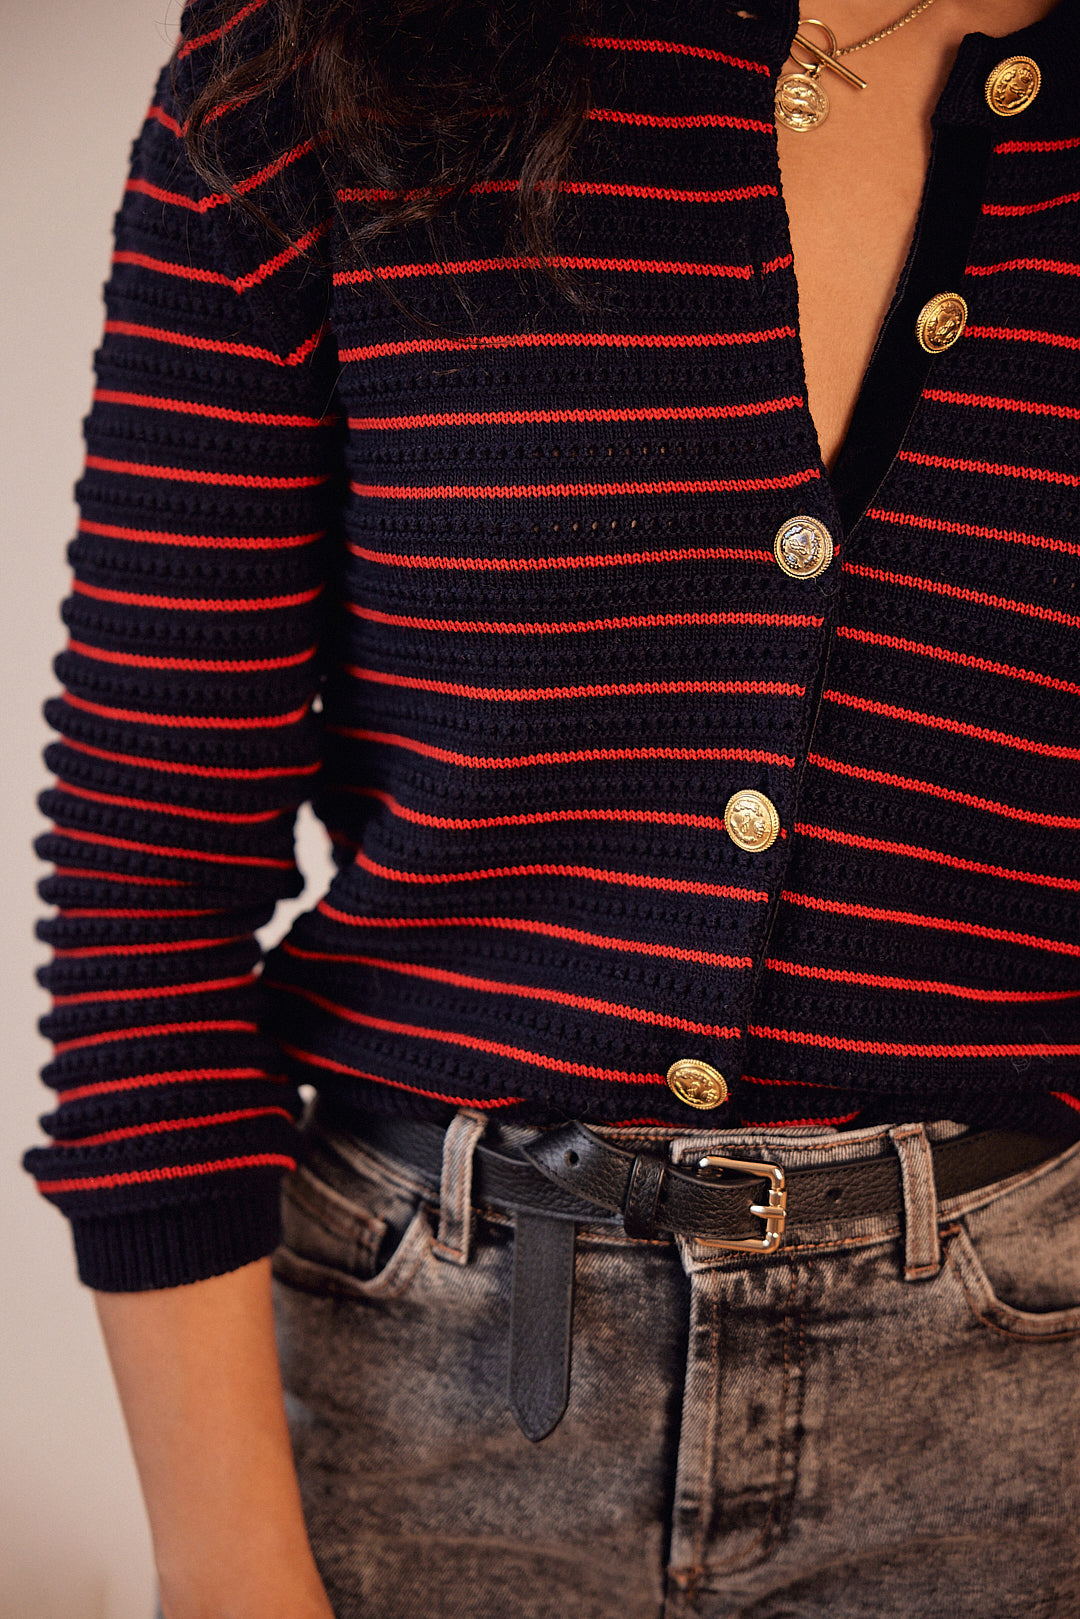 Vera cardigan with navy and red stripes